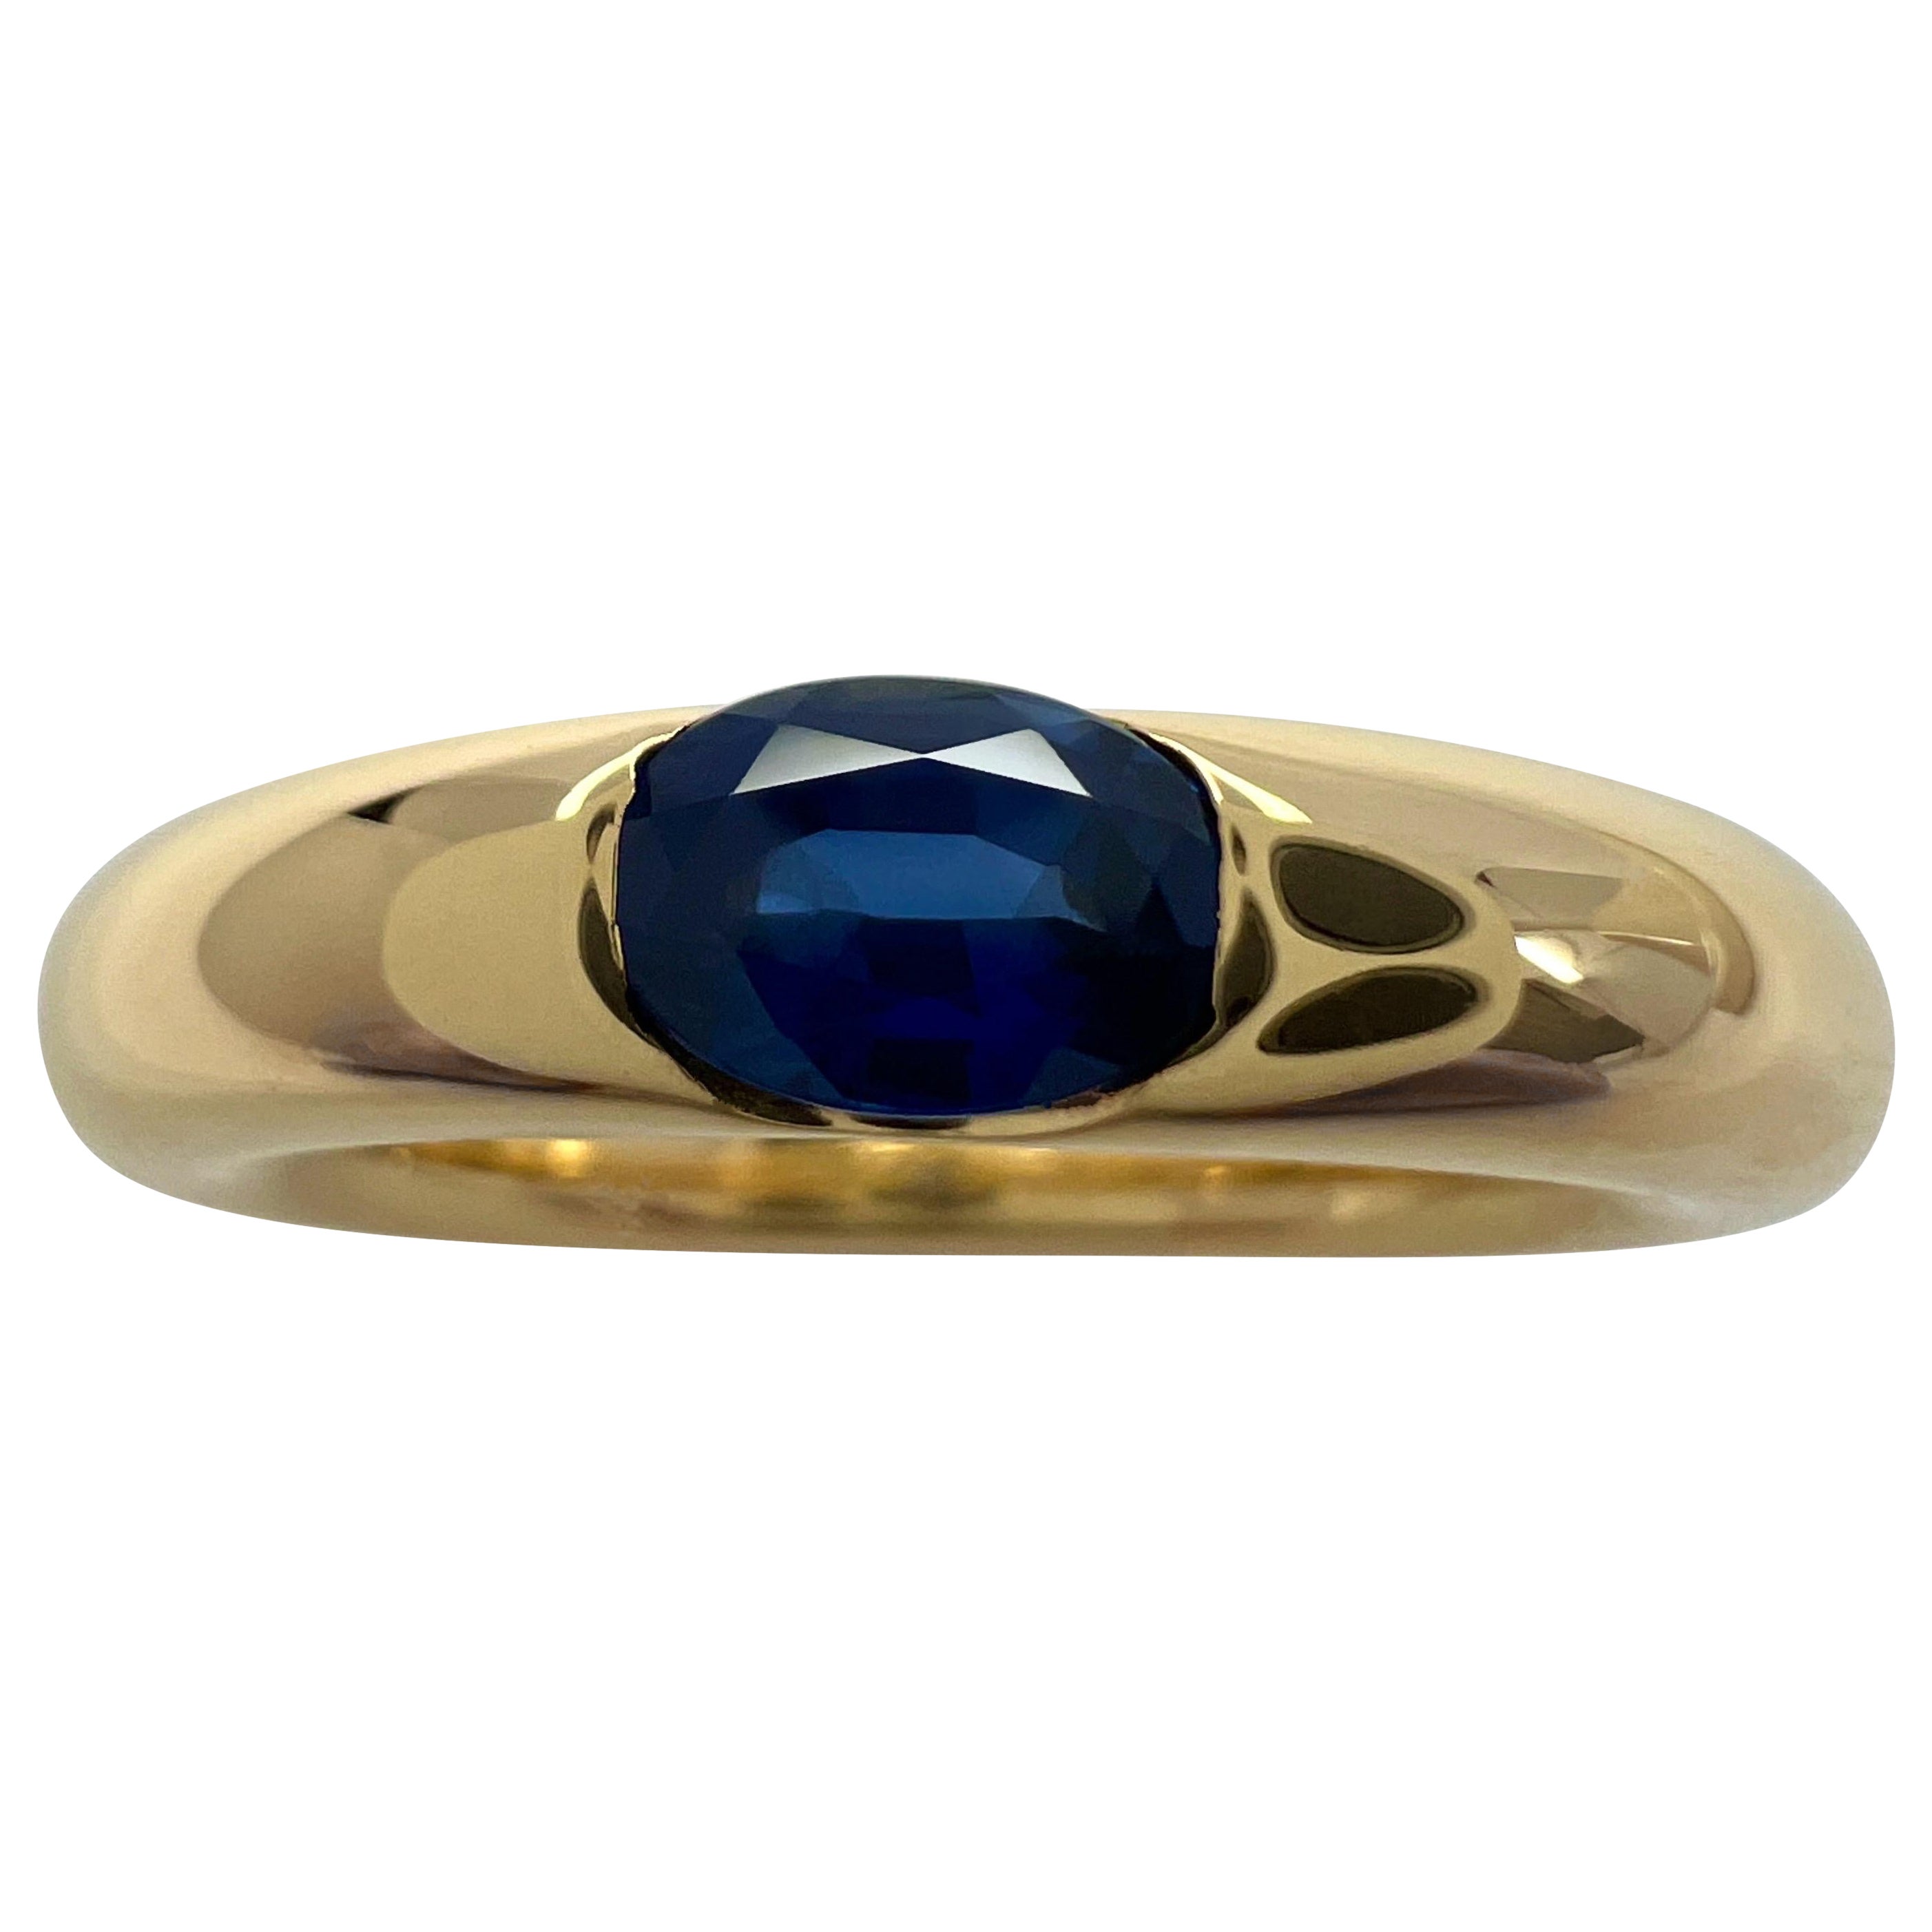 Vintage Cartier Blue Sapphire Oval Ellipse 18k Yellow Gold Solitaire Ring 51